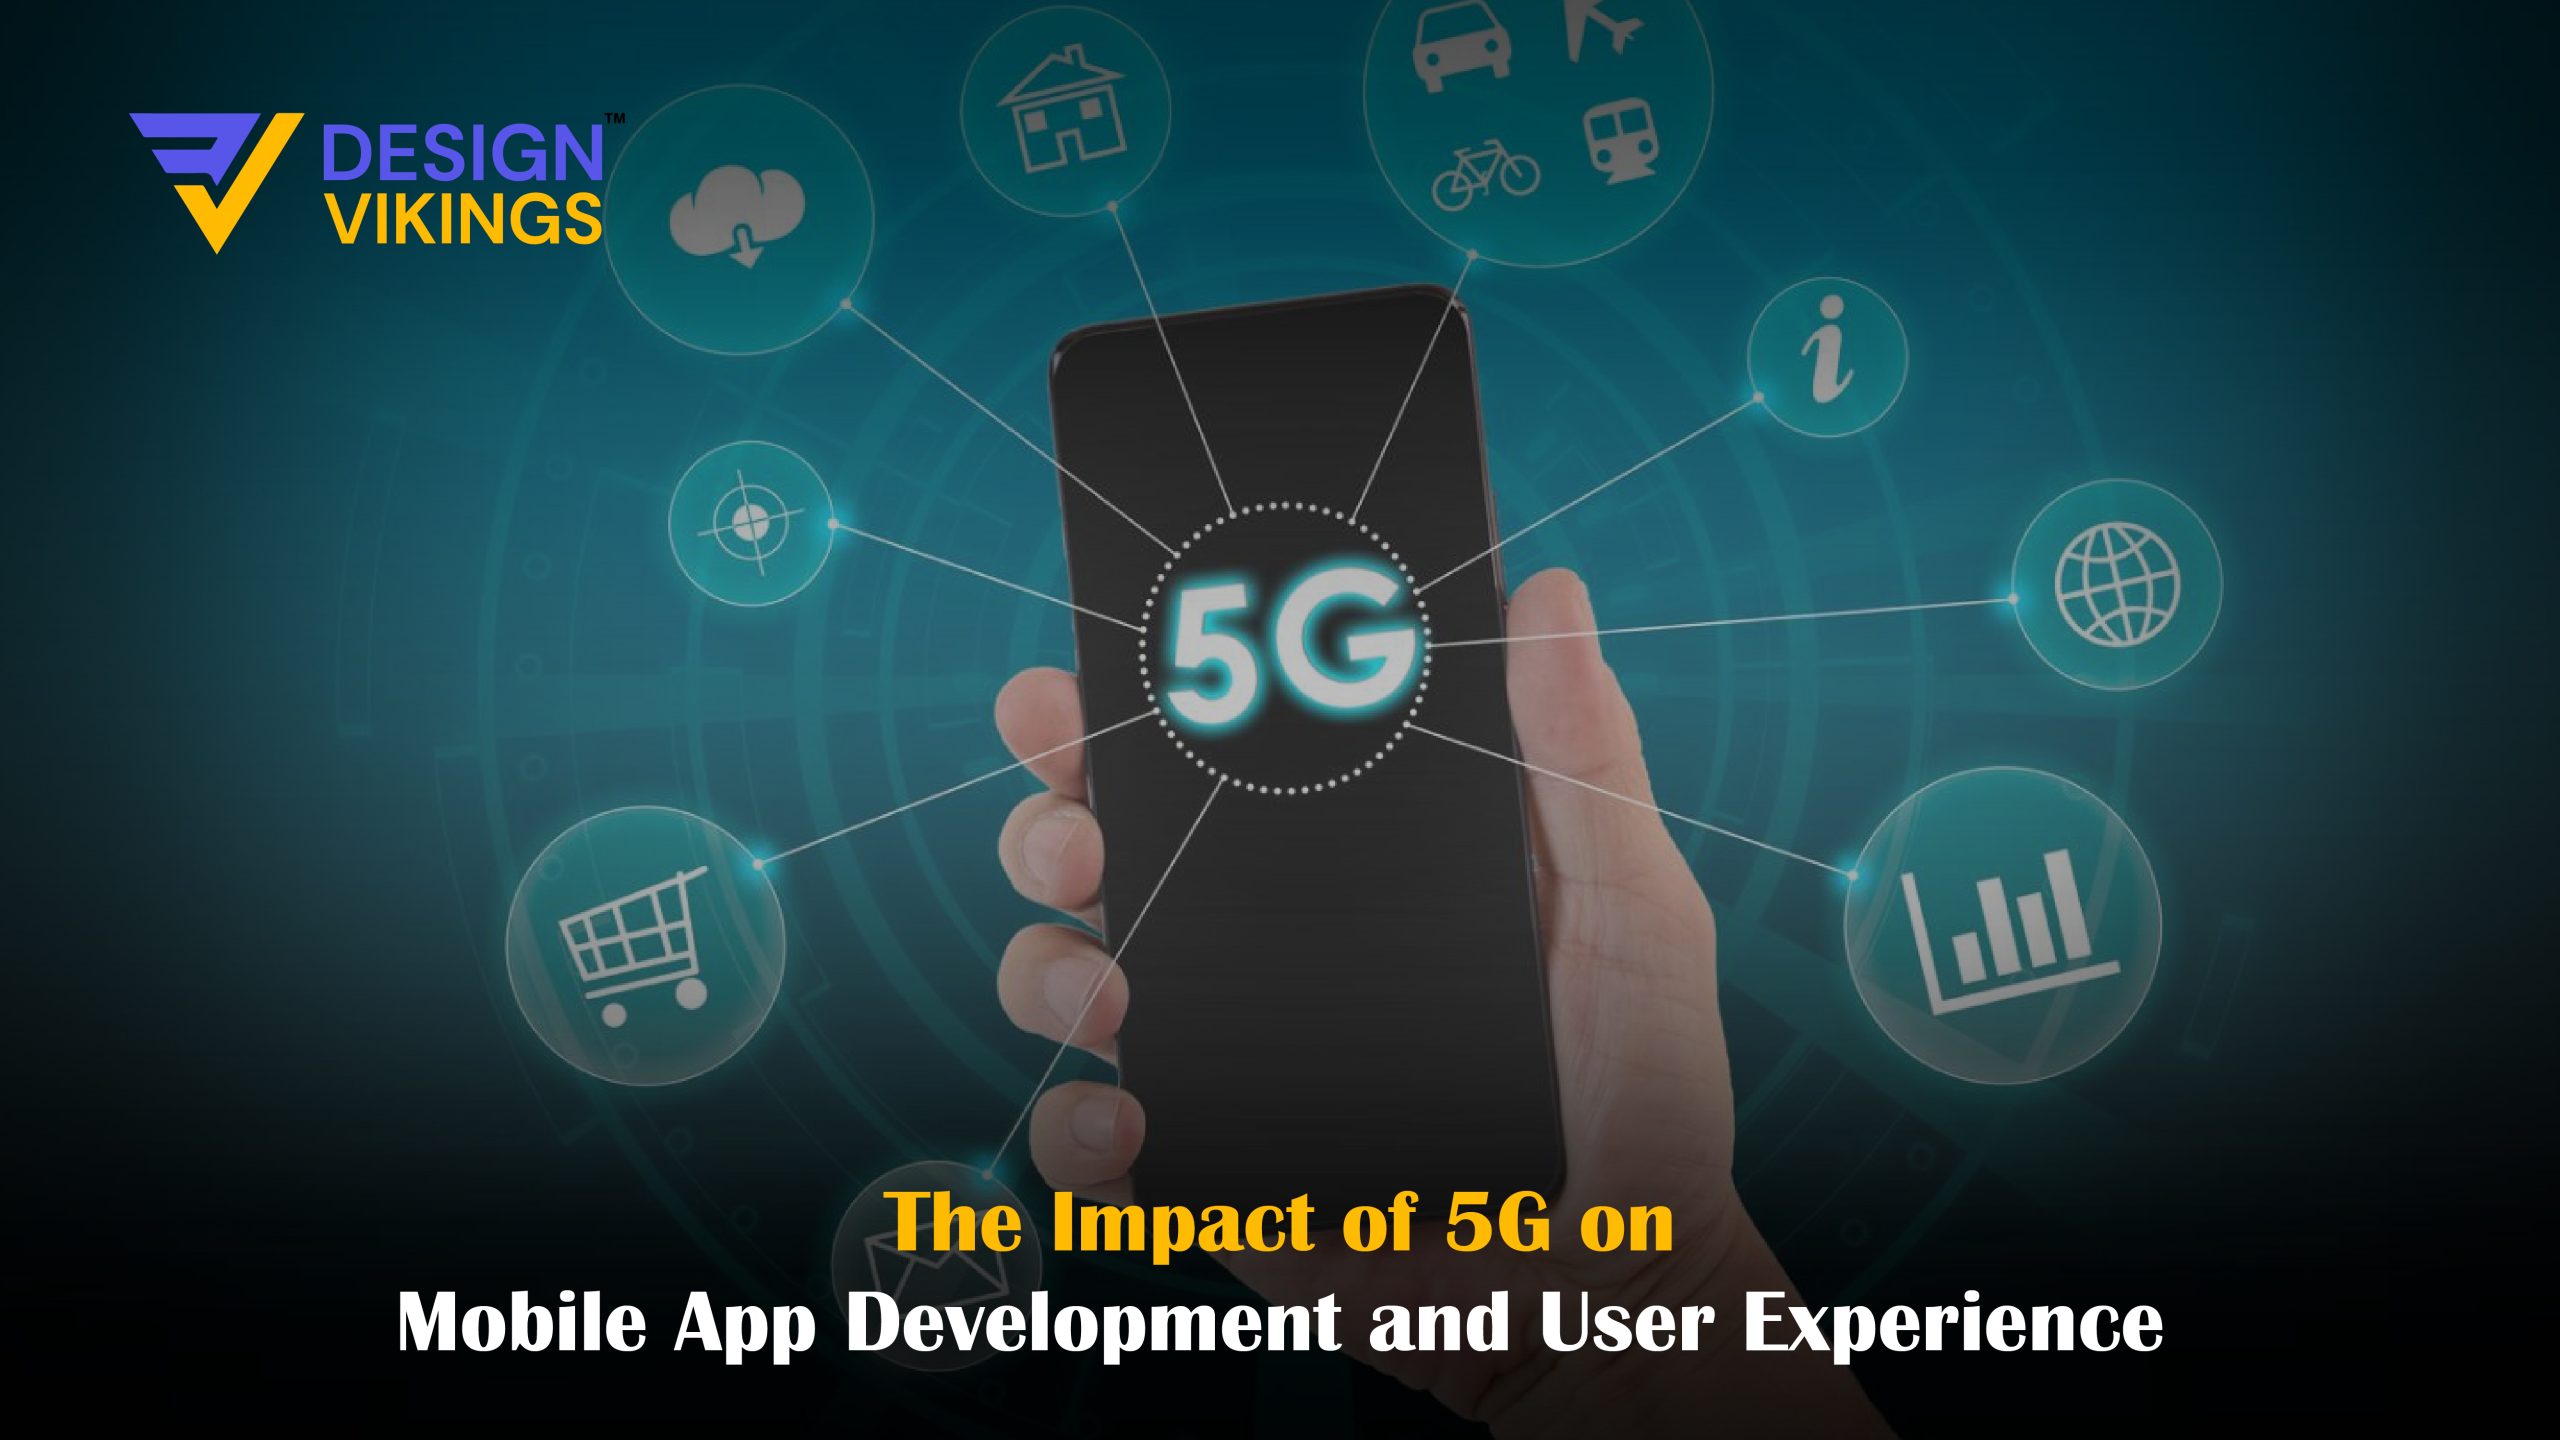 The role of 5G in mobile app development in enhancing user experience.